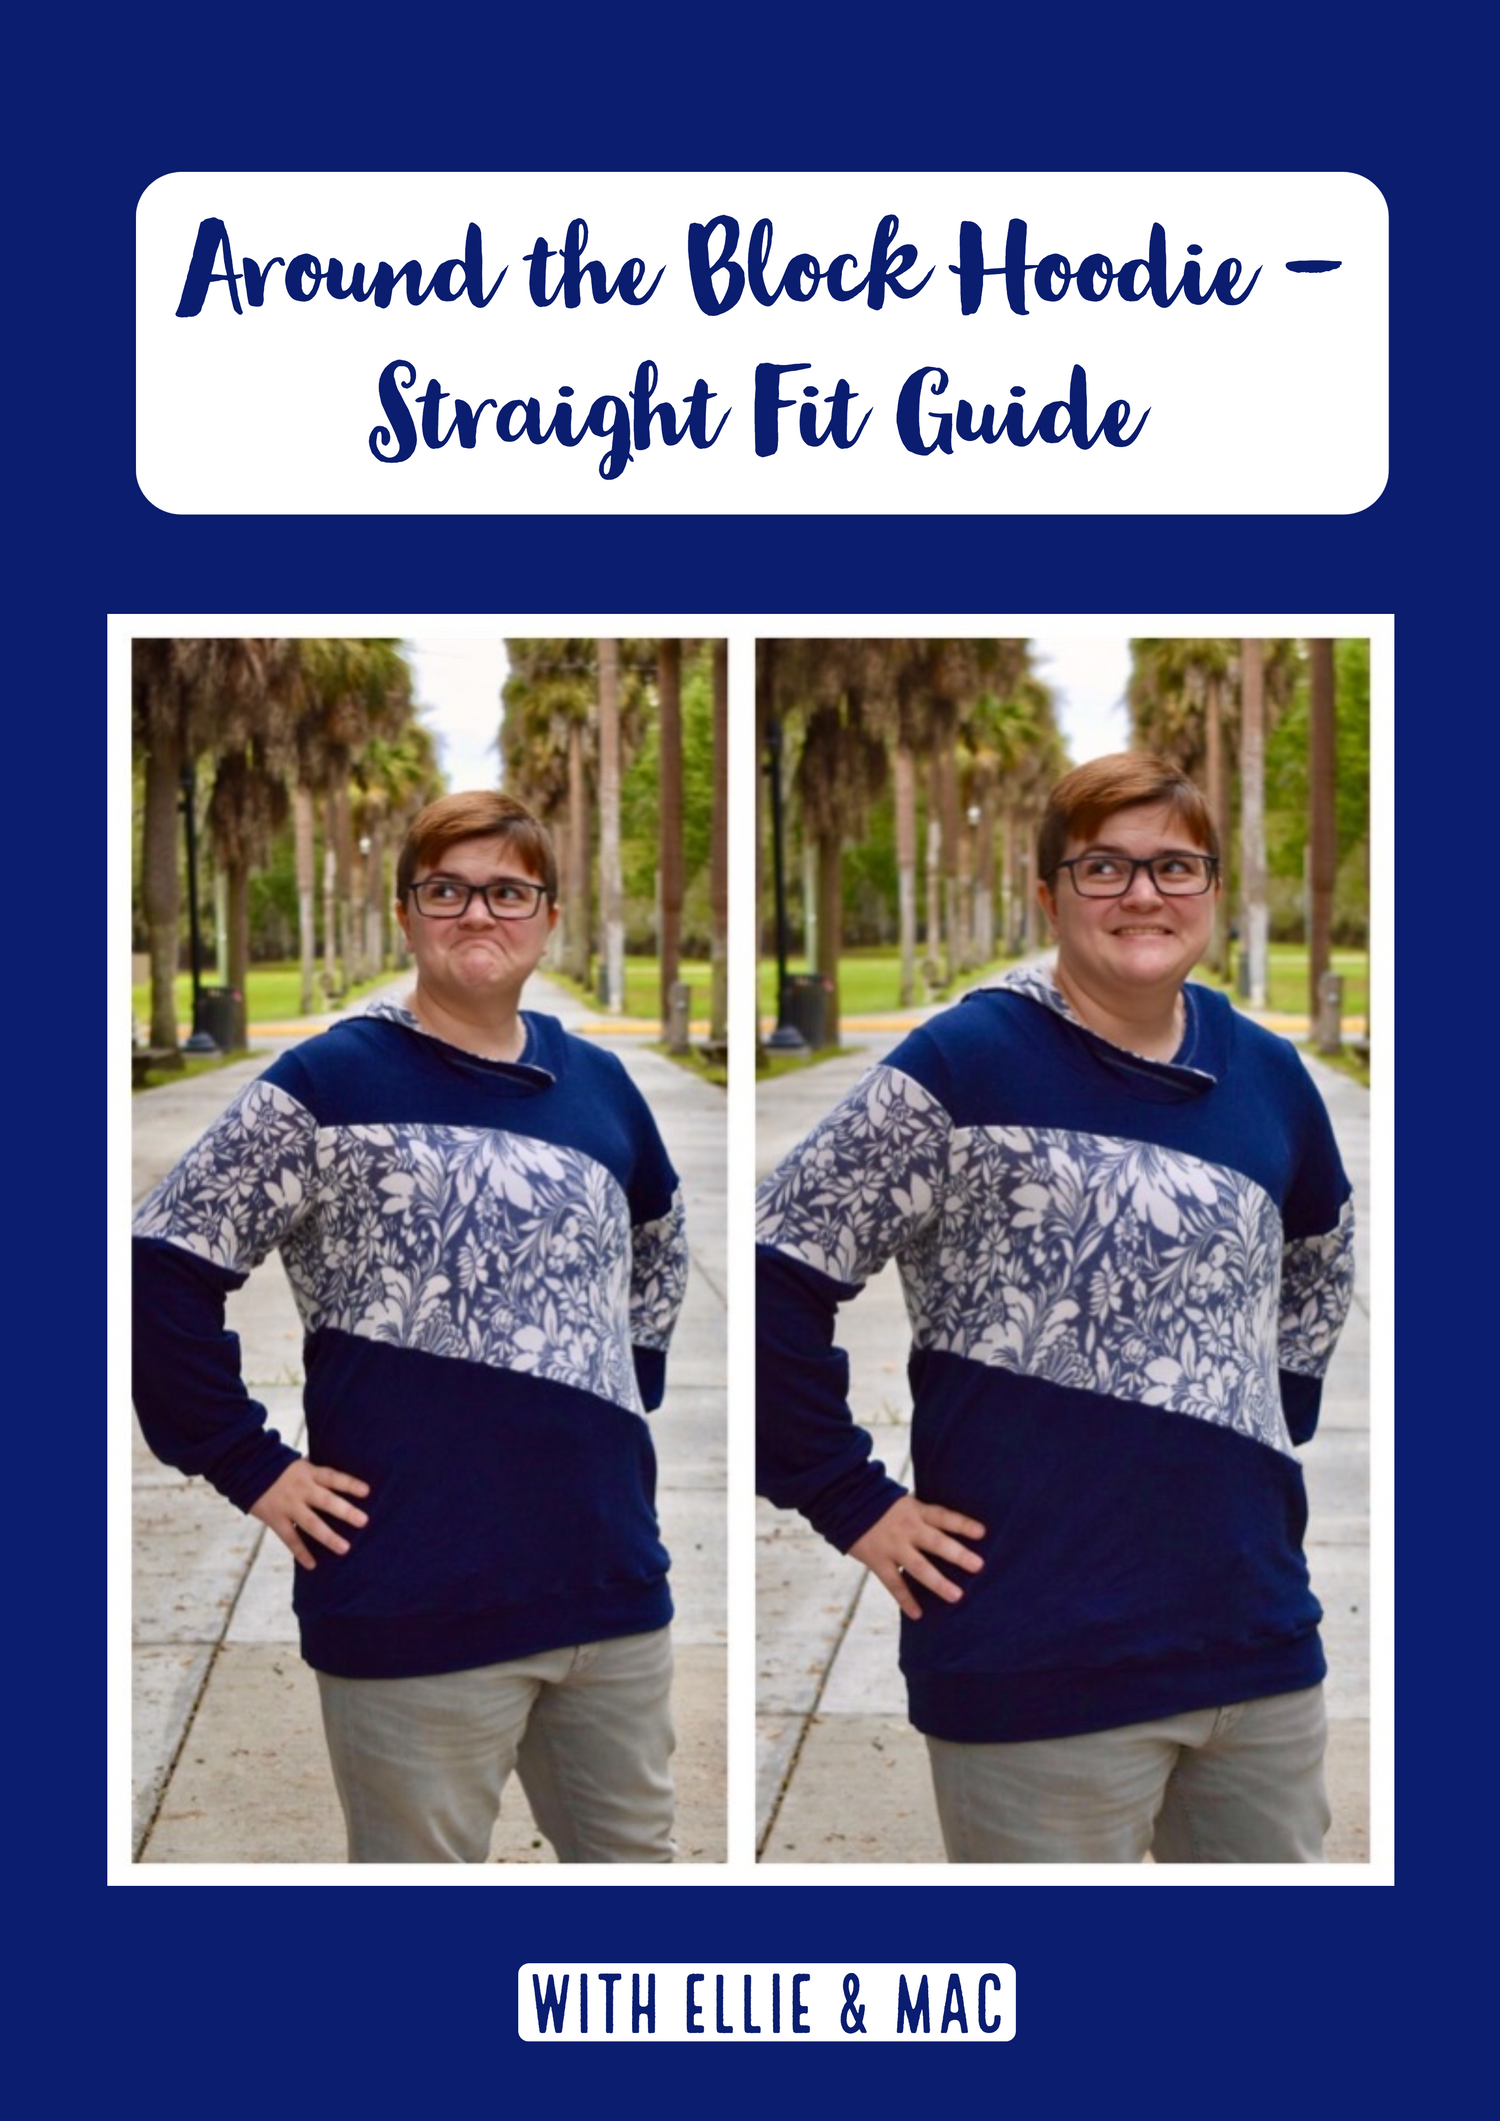 Around the Block - Straight-Fit Guide